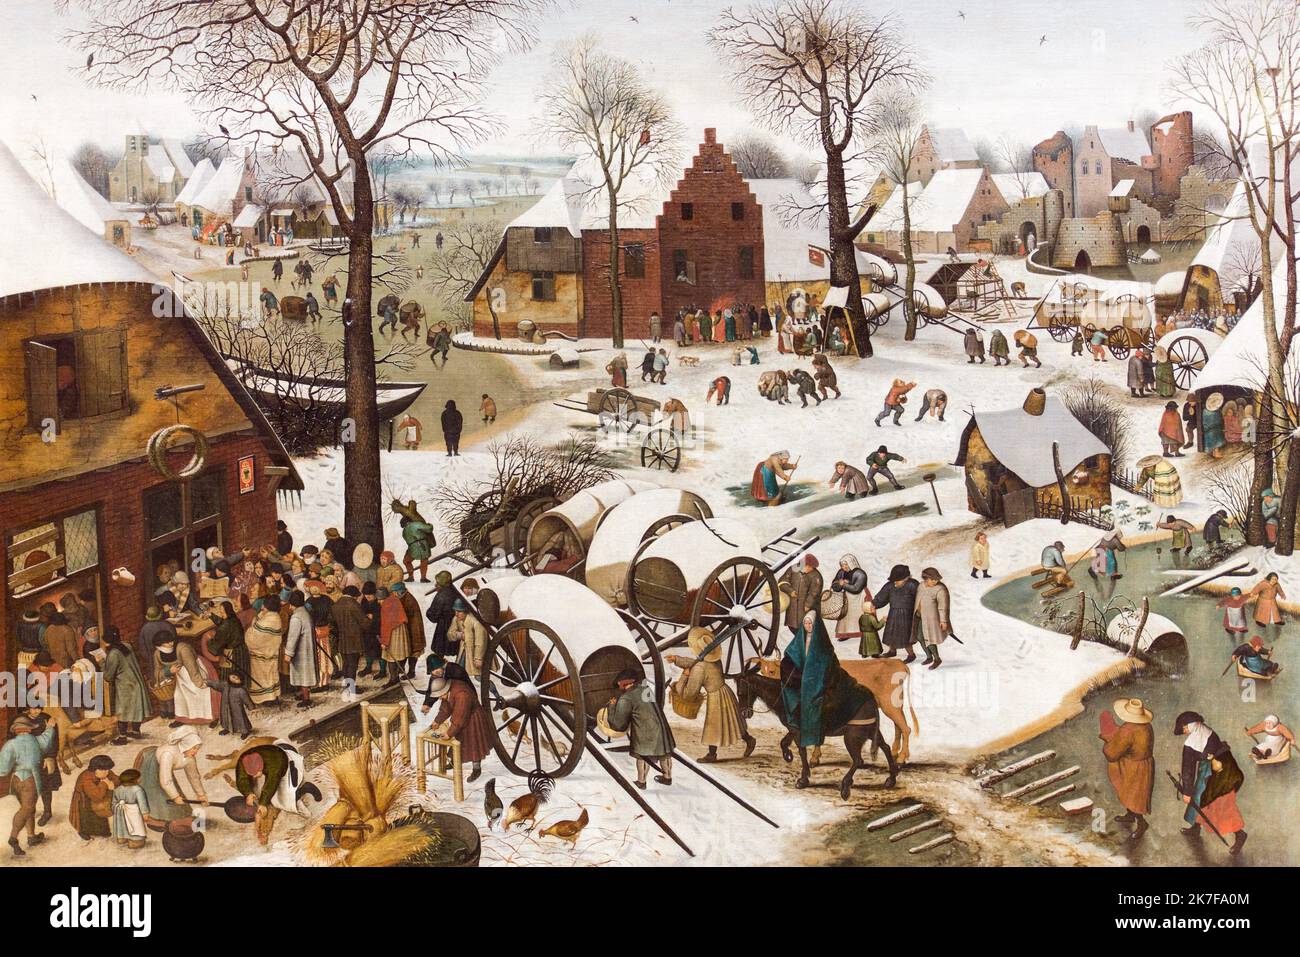 ©Active Museu/MAXPPP - ActiveMuseum 0002840.jpg / Le Denombrement de Bethleem Panneau de chene 1610 - / Pieter Brueghel le Jeune / Peinture Active Museum / Le Pictorium Boat ,Cart (barrow) ,Cereal (grain) ,Child ,Clear ,Cold ,Count (number) ,Crowd ,Dead wood ,Freeze-up ,Horizontal ,Ice (frost) ,Man ,Map out (to) ,Pay for (to) ,Play (to) ,Population ,Snow ,Strangle (to) ,Tax ,Tithe ,To skate ,Village ,Winter ,Wintry landscape ,Woman ,Bethlehem ,Israel ,Judea ,Middle East ,17th century ,Pieter Brueghel the Younger ,Painting ,  Stock Photo